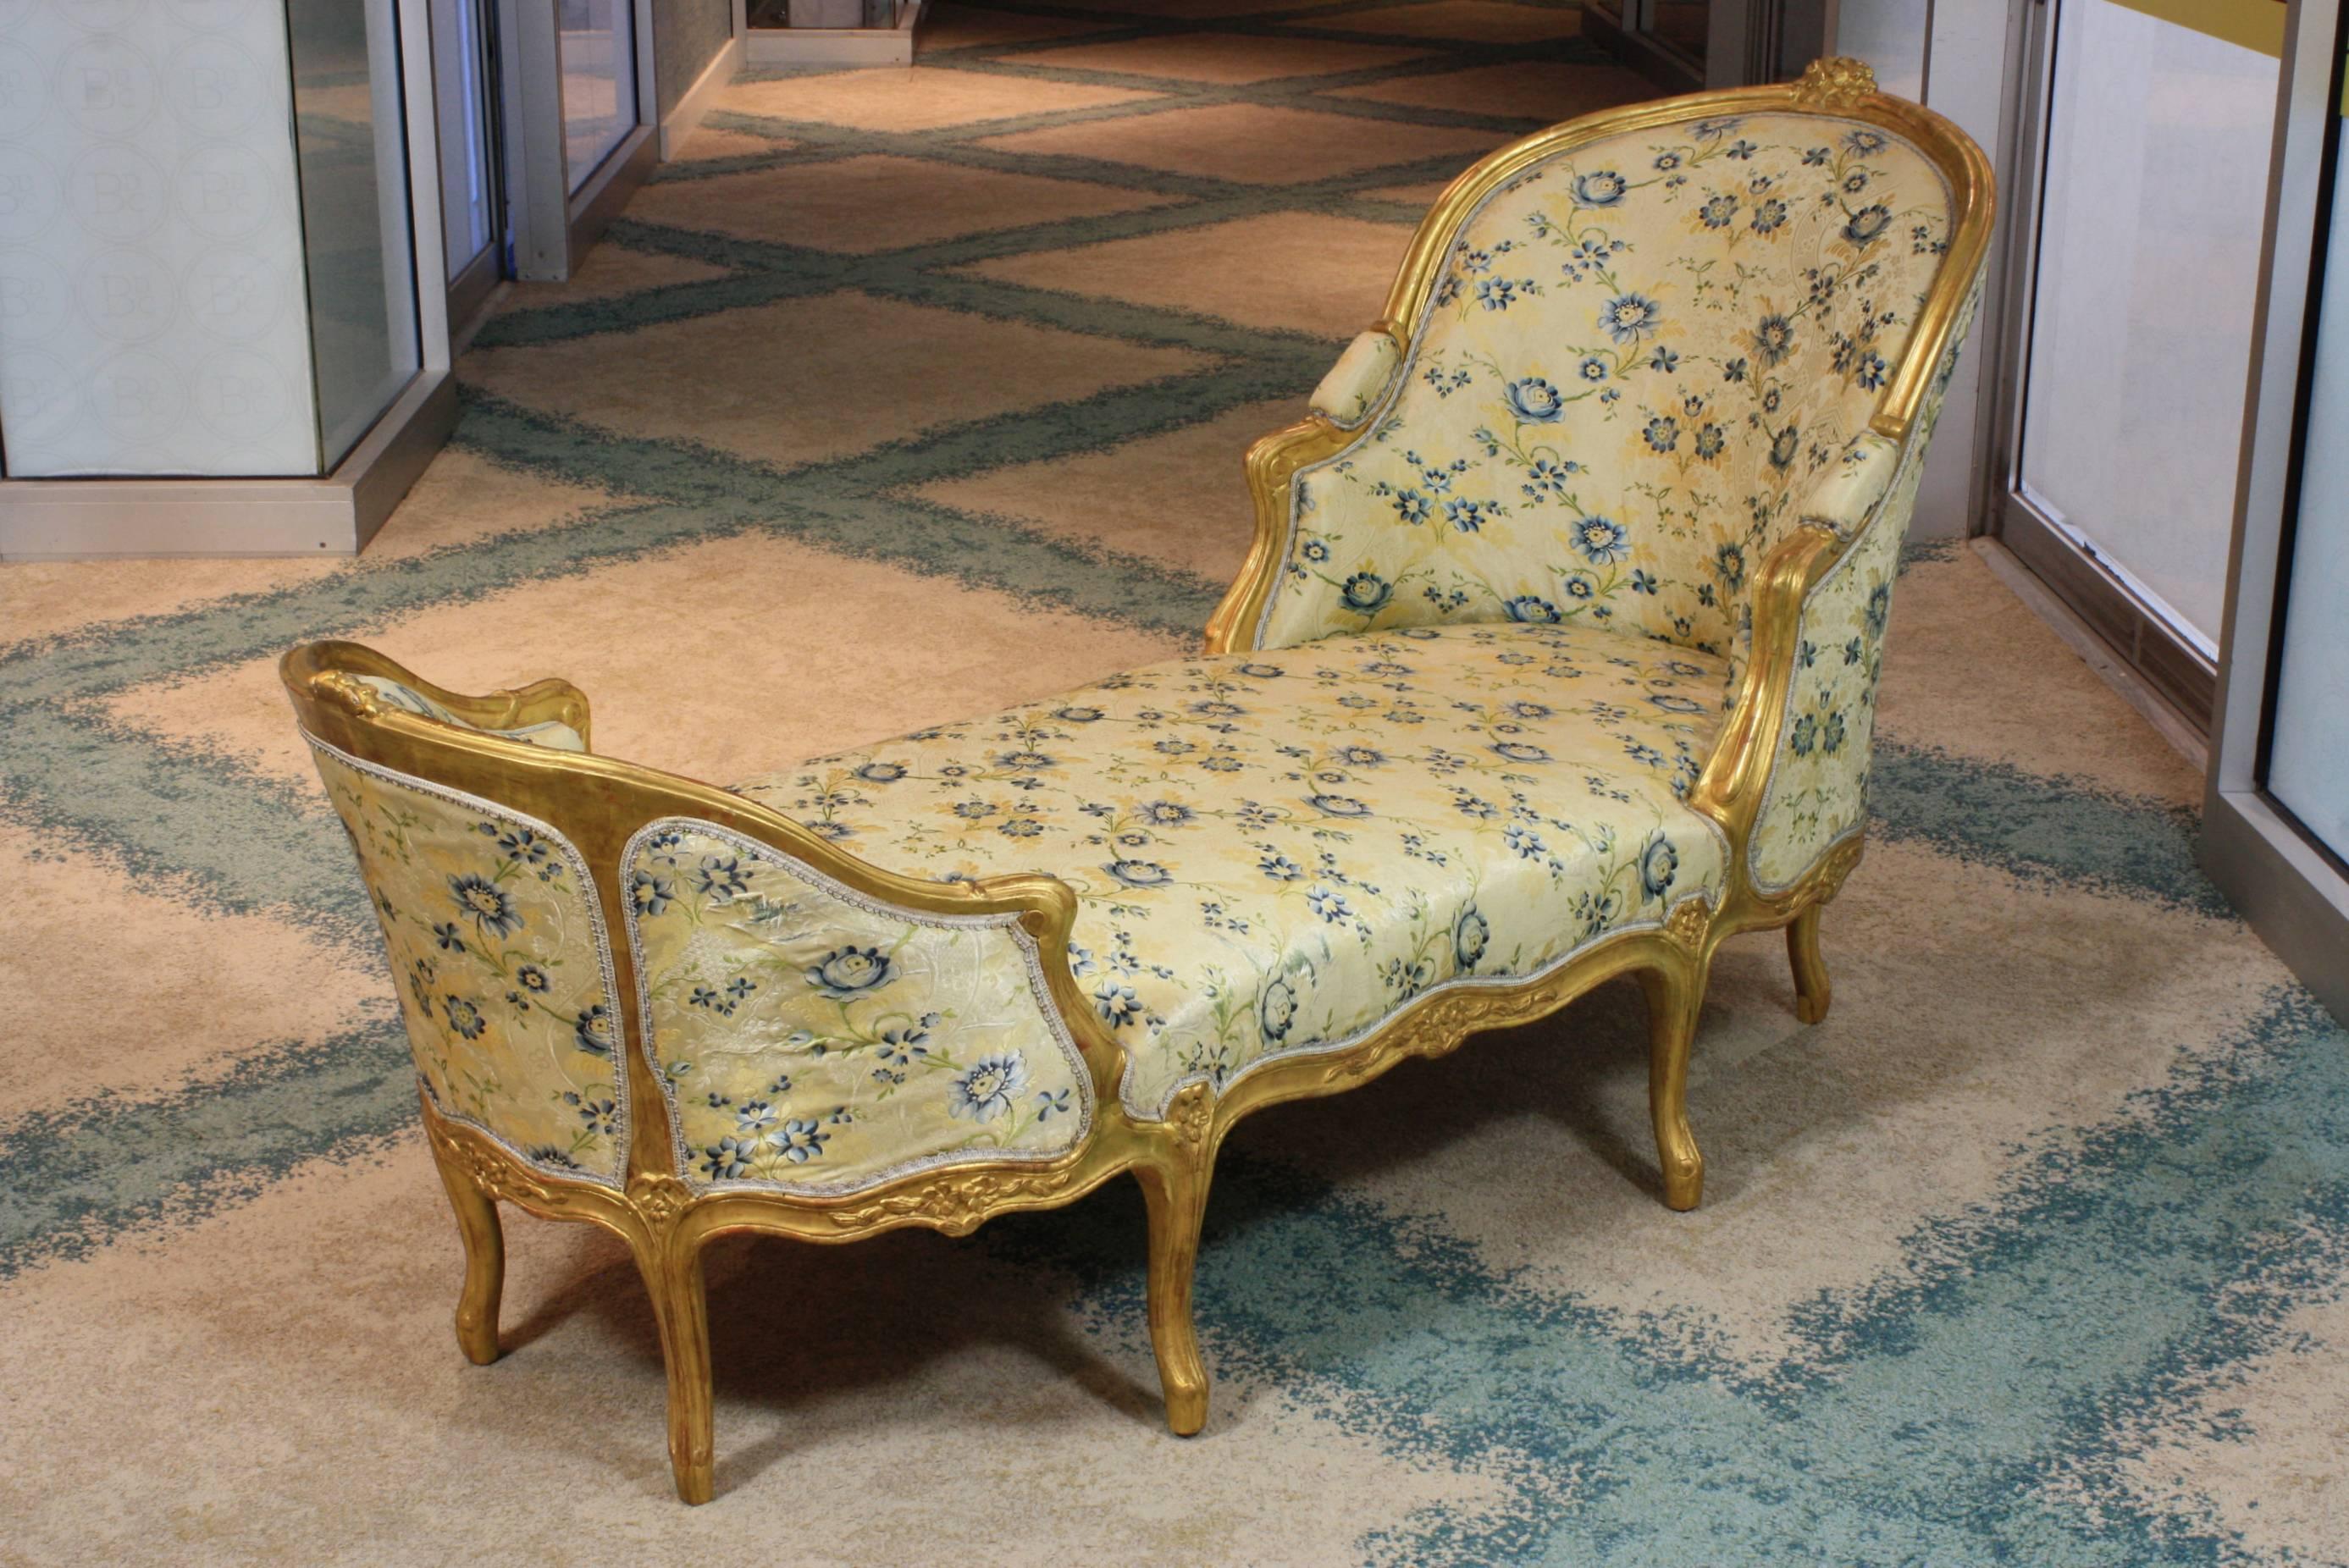 Elegant French Louis XV style giltwood chaise longue, with nicely-carved flower cartouches on the head and foot, floral carvings on the seat rail and other rococo ornaments. Upholstered in lovely silk lampas fabric (probably Tassinari) with gimp